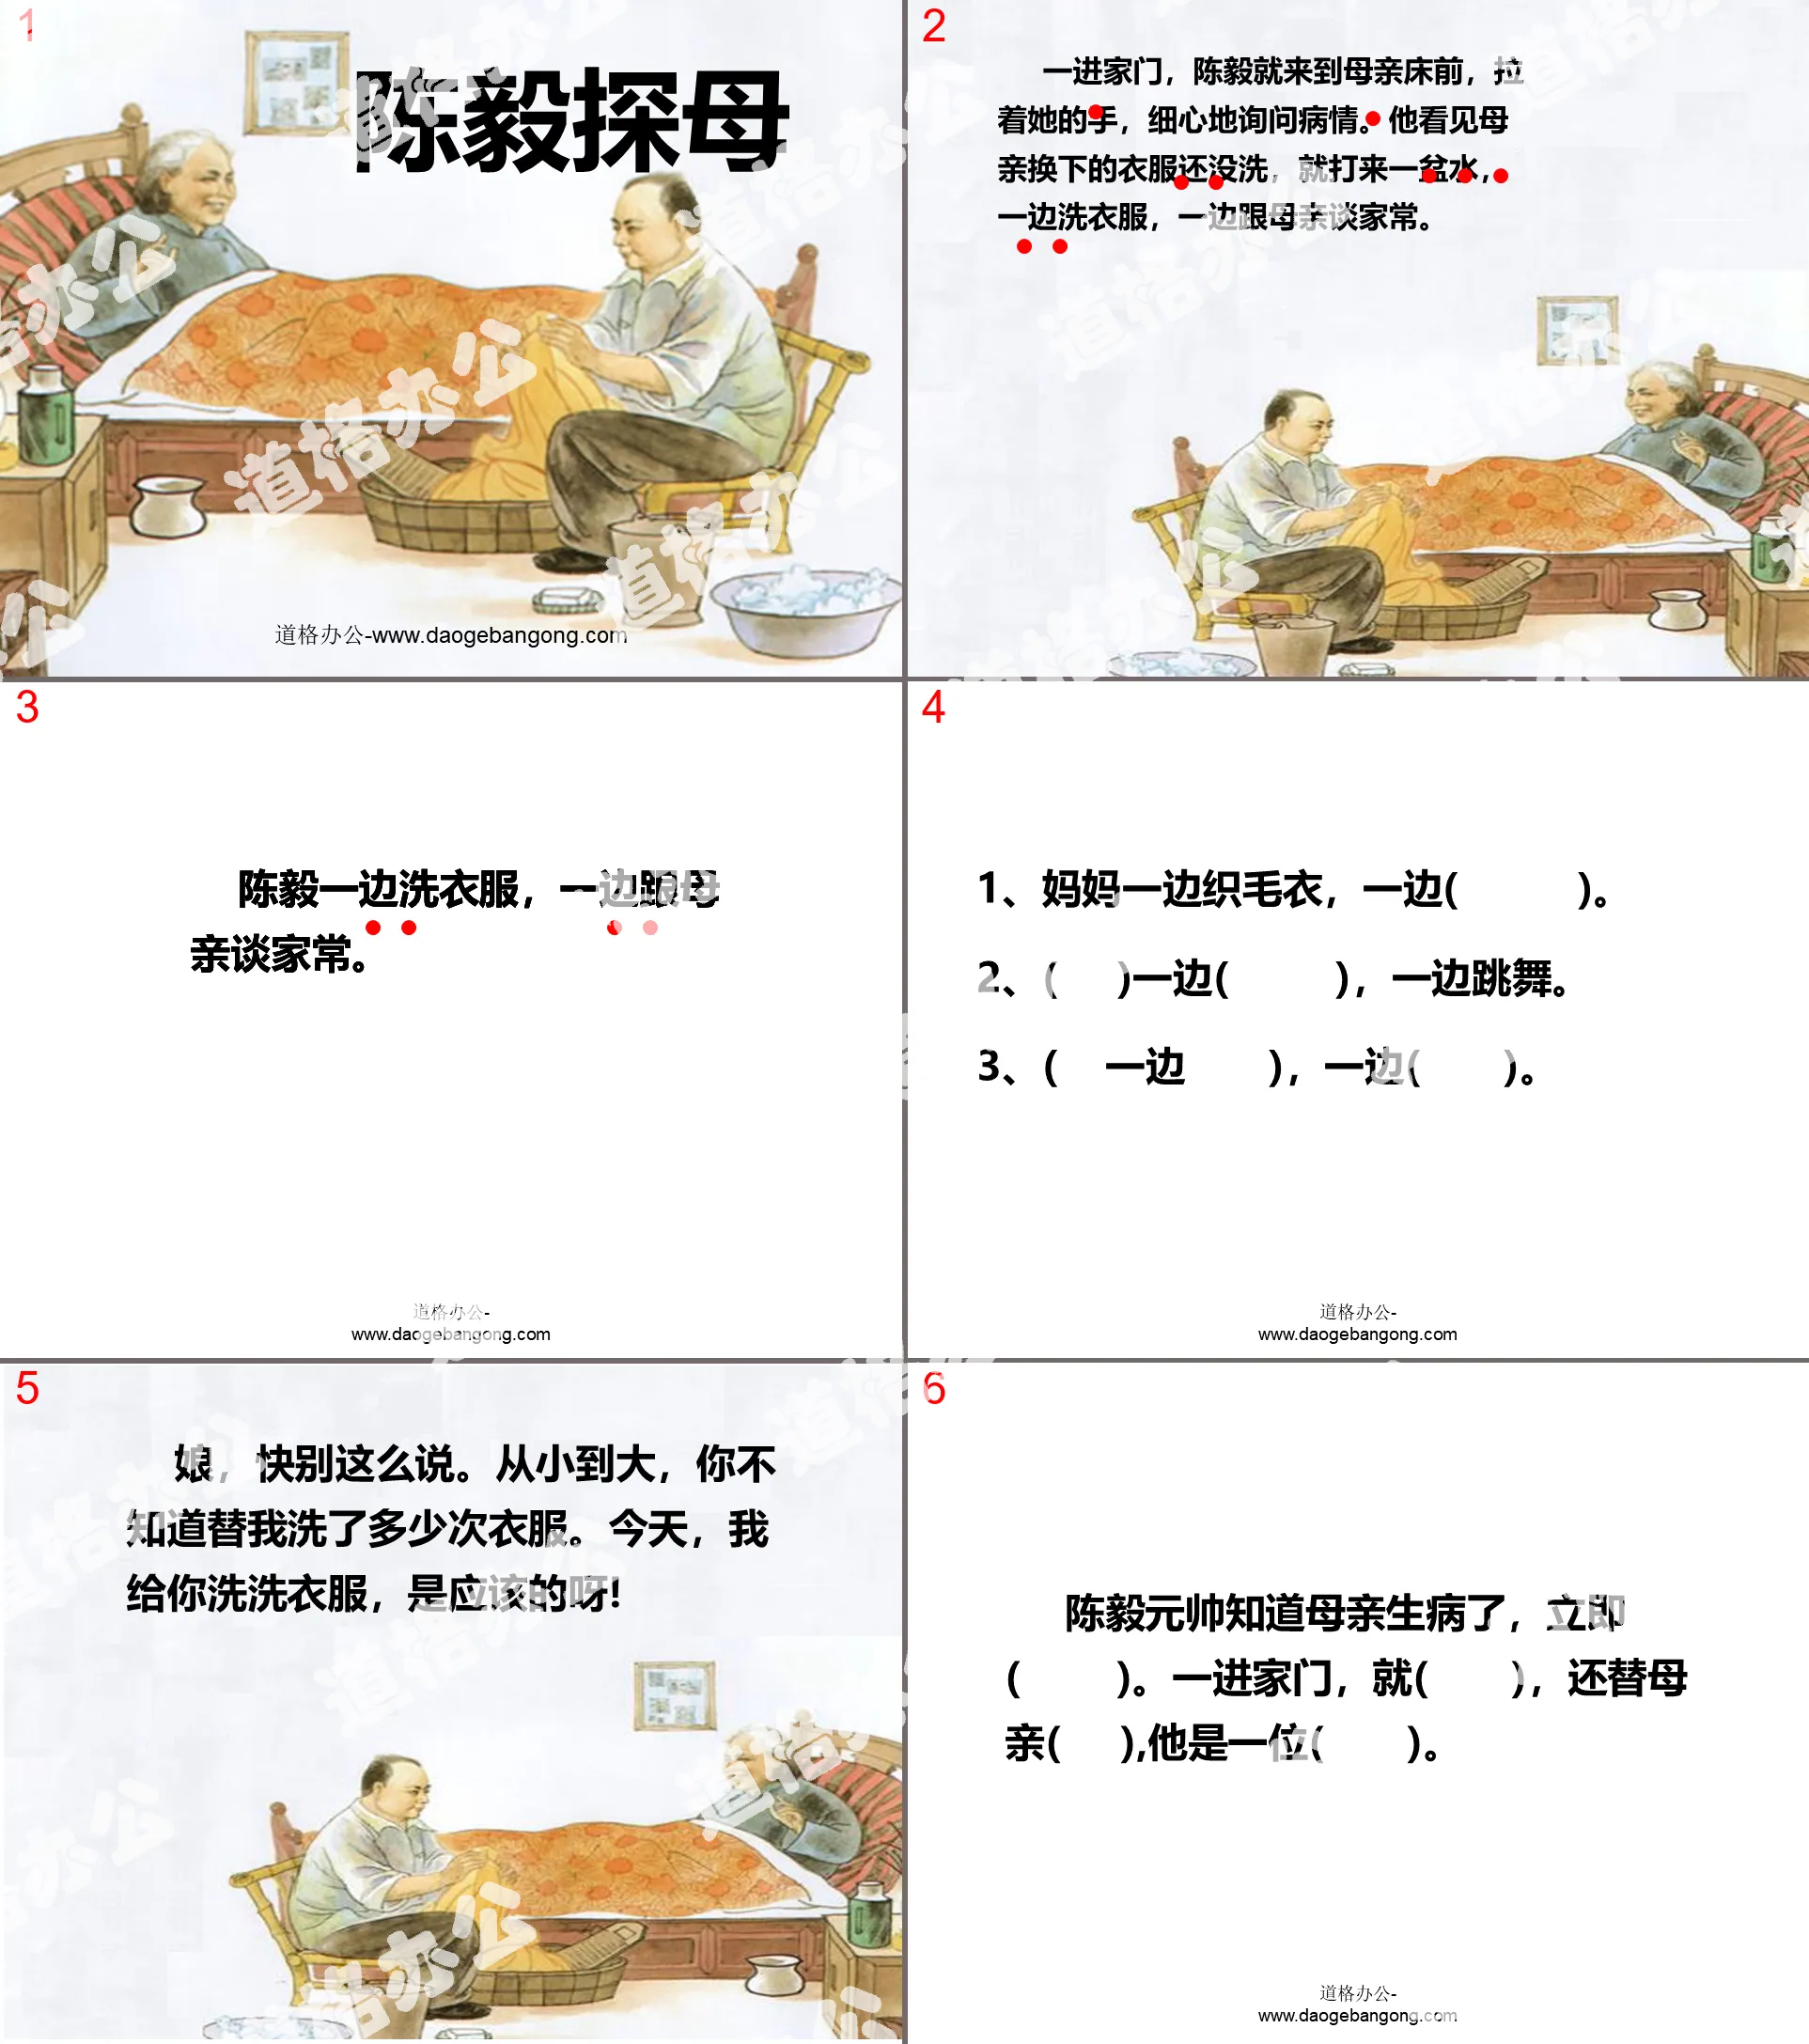 "Chen Yi Visits His Mother" PPT courseware